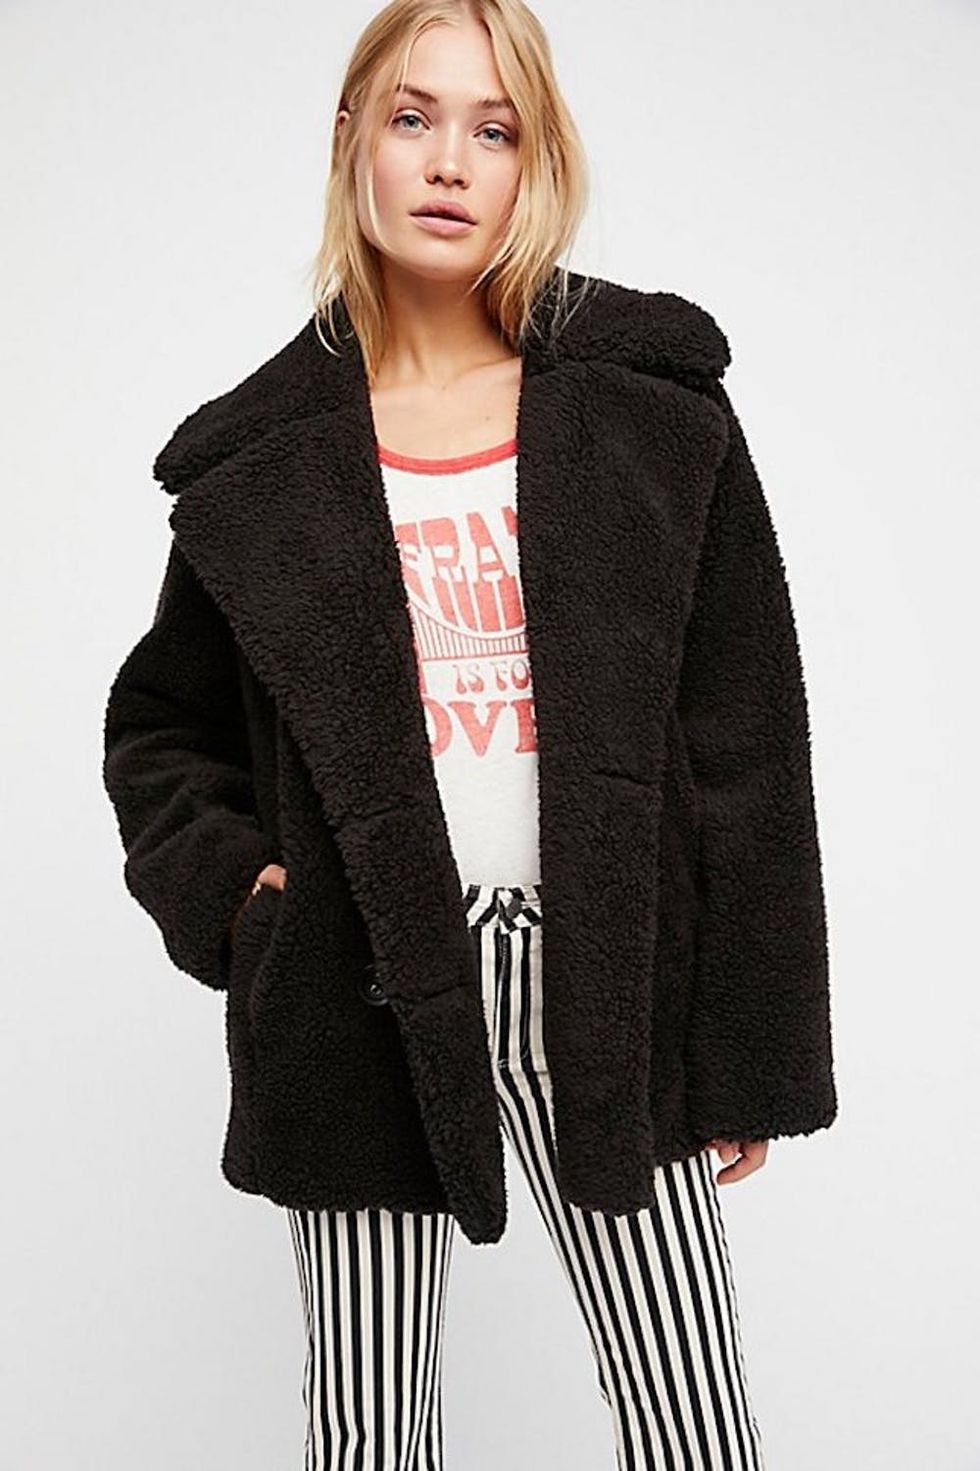 9 Cozy Teddy Coats to Consider for the Cold Weather Season - Brit + Co